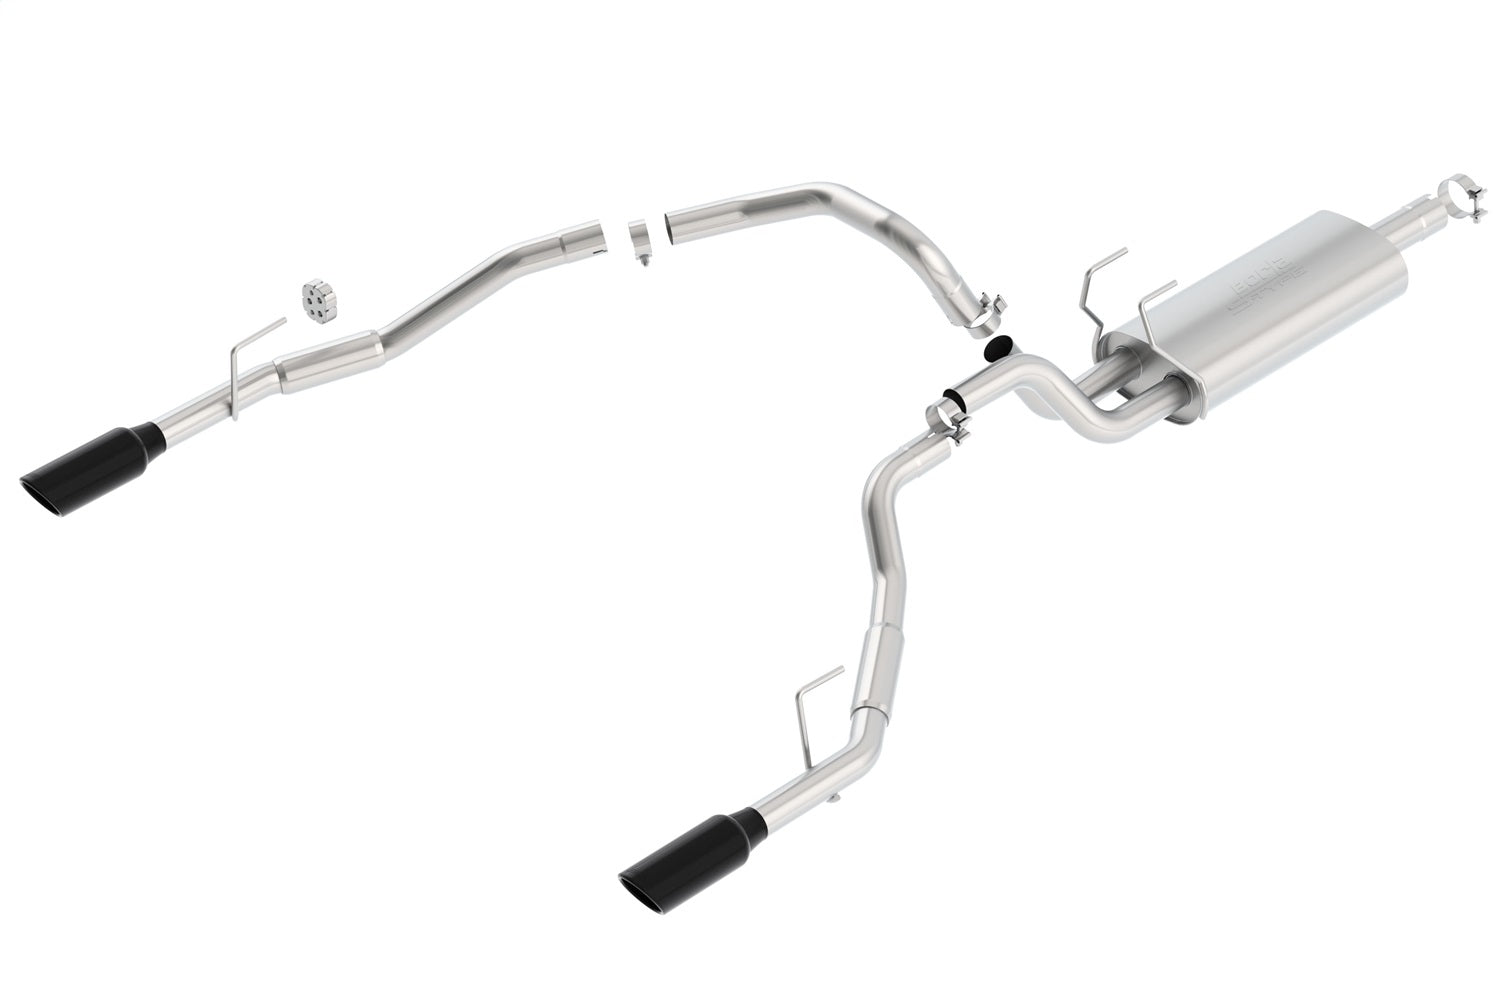 Borla 140308BC S-Type Cat-Back Exhaust System Fits 1500 1500 Classic Ram 1500